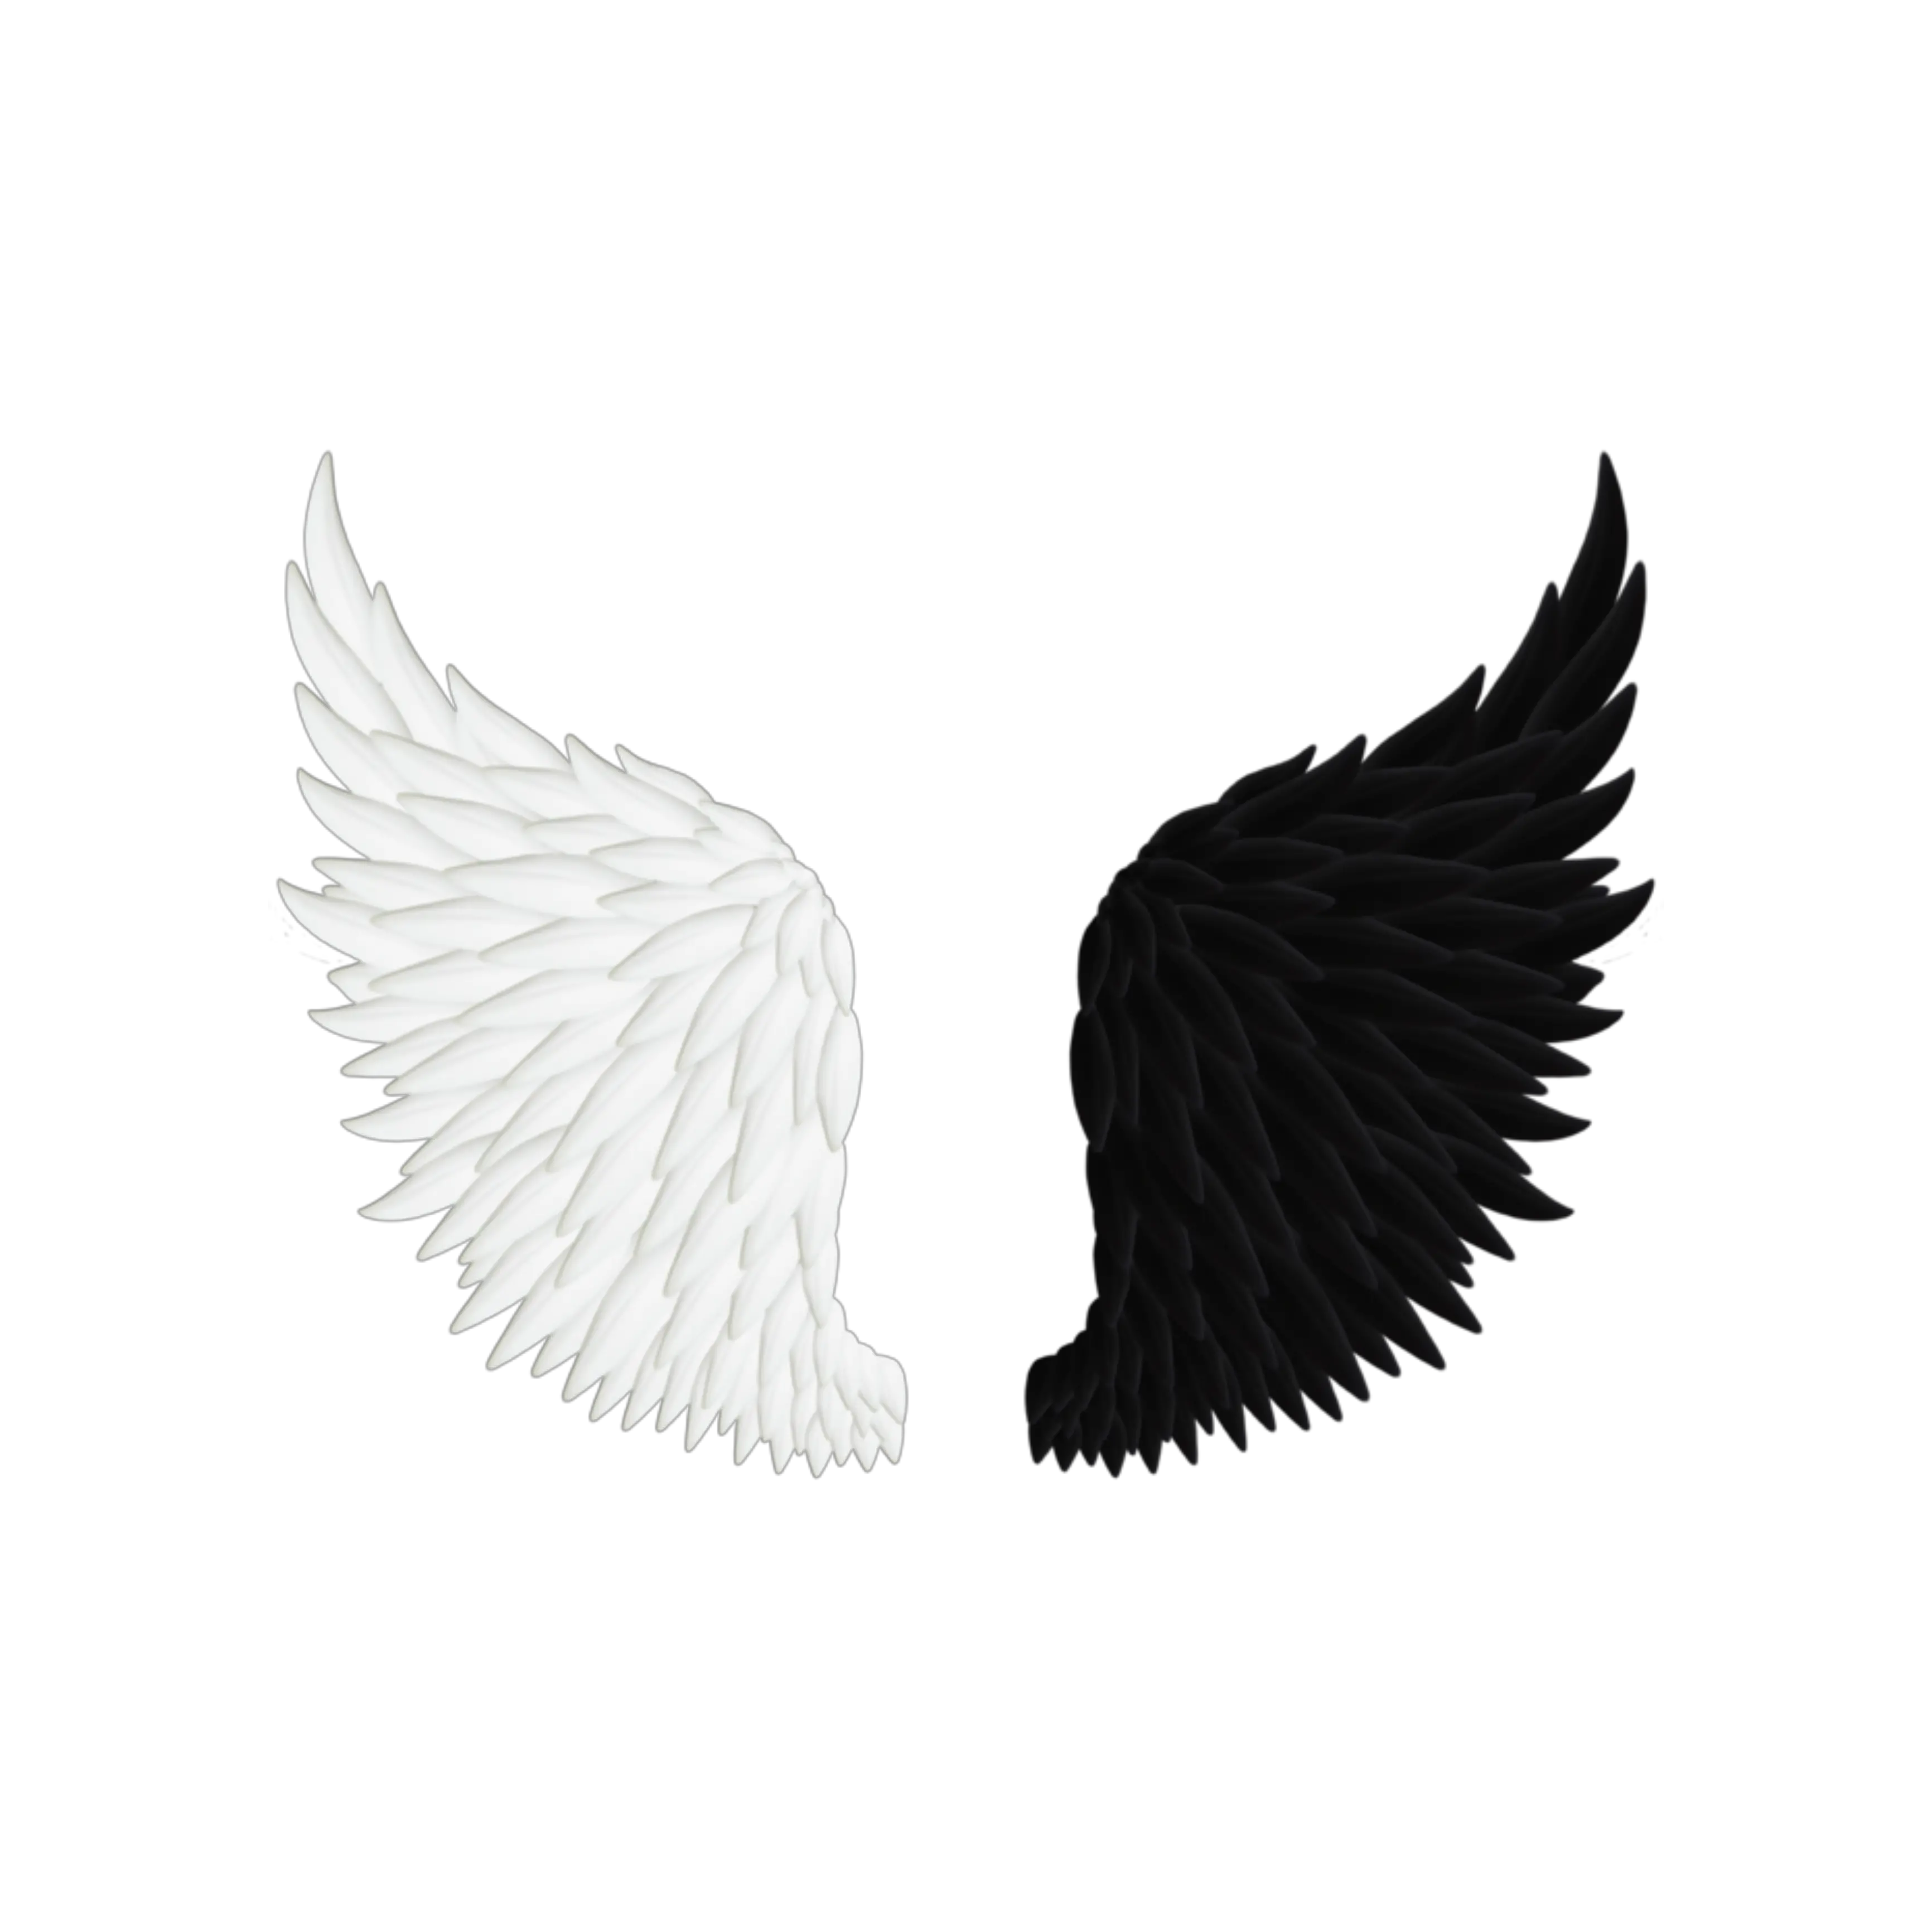 Angel Wings Png Transparent Image Black And White Angel Wings Png Wing Png